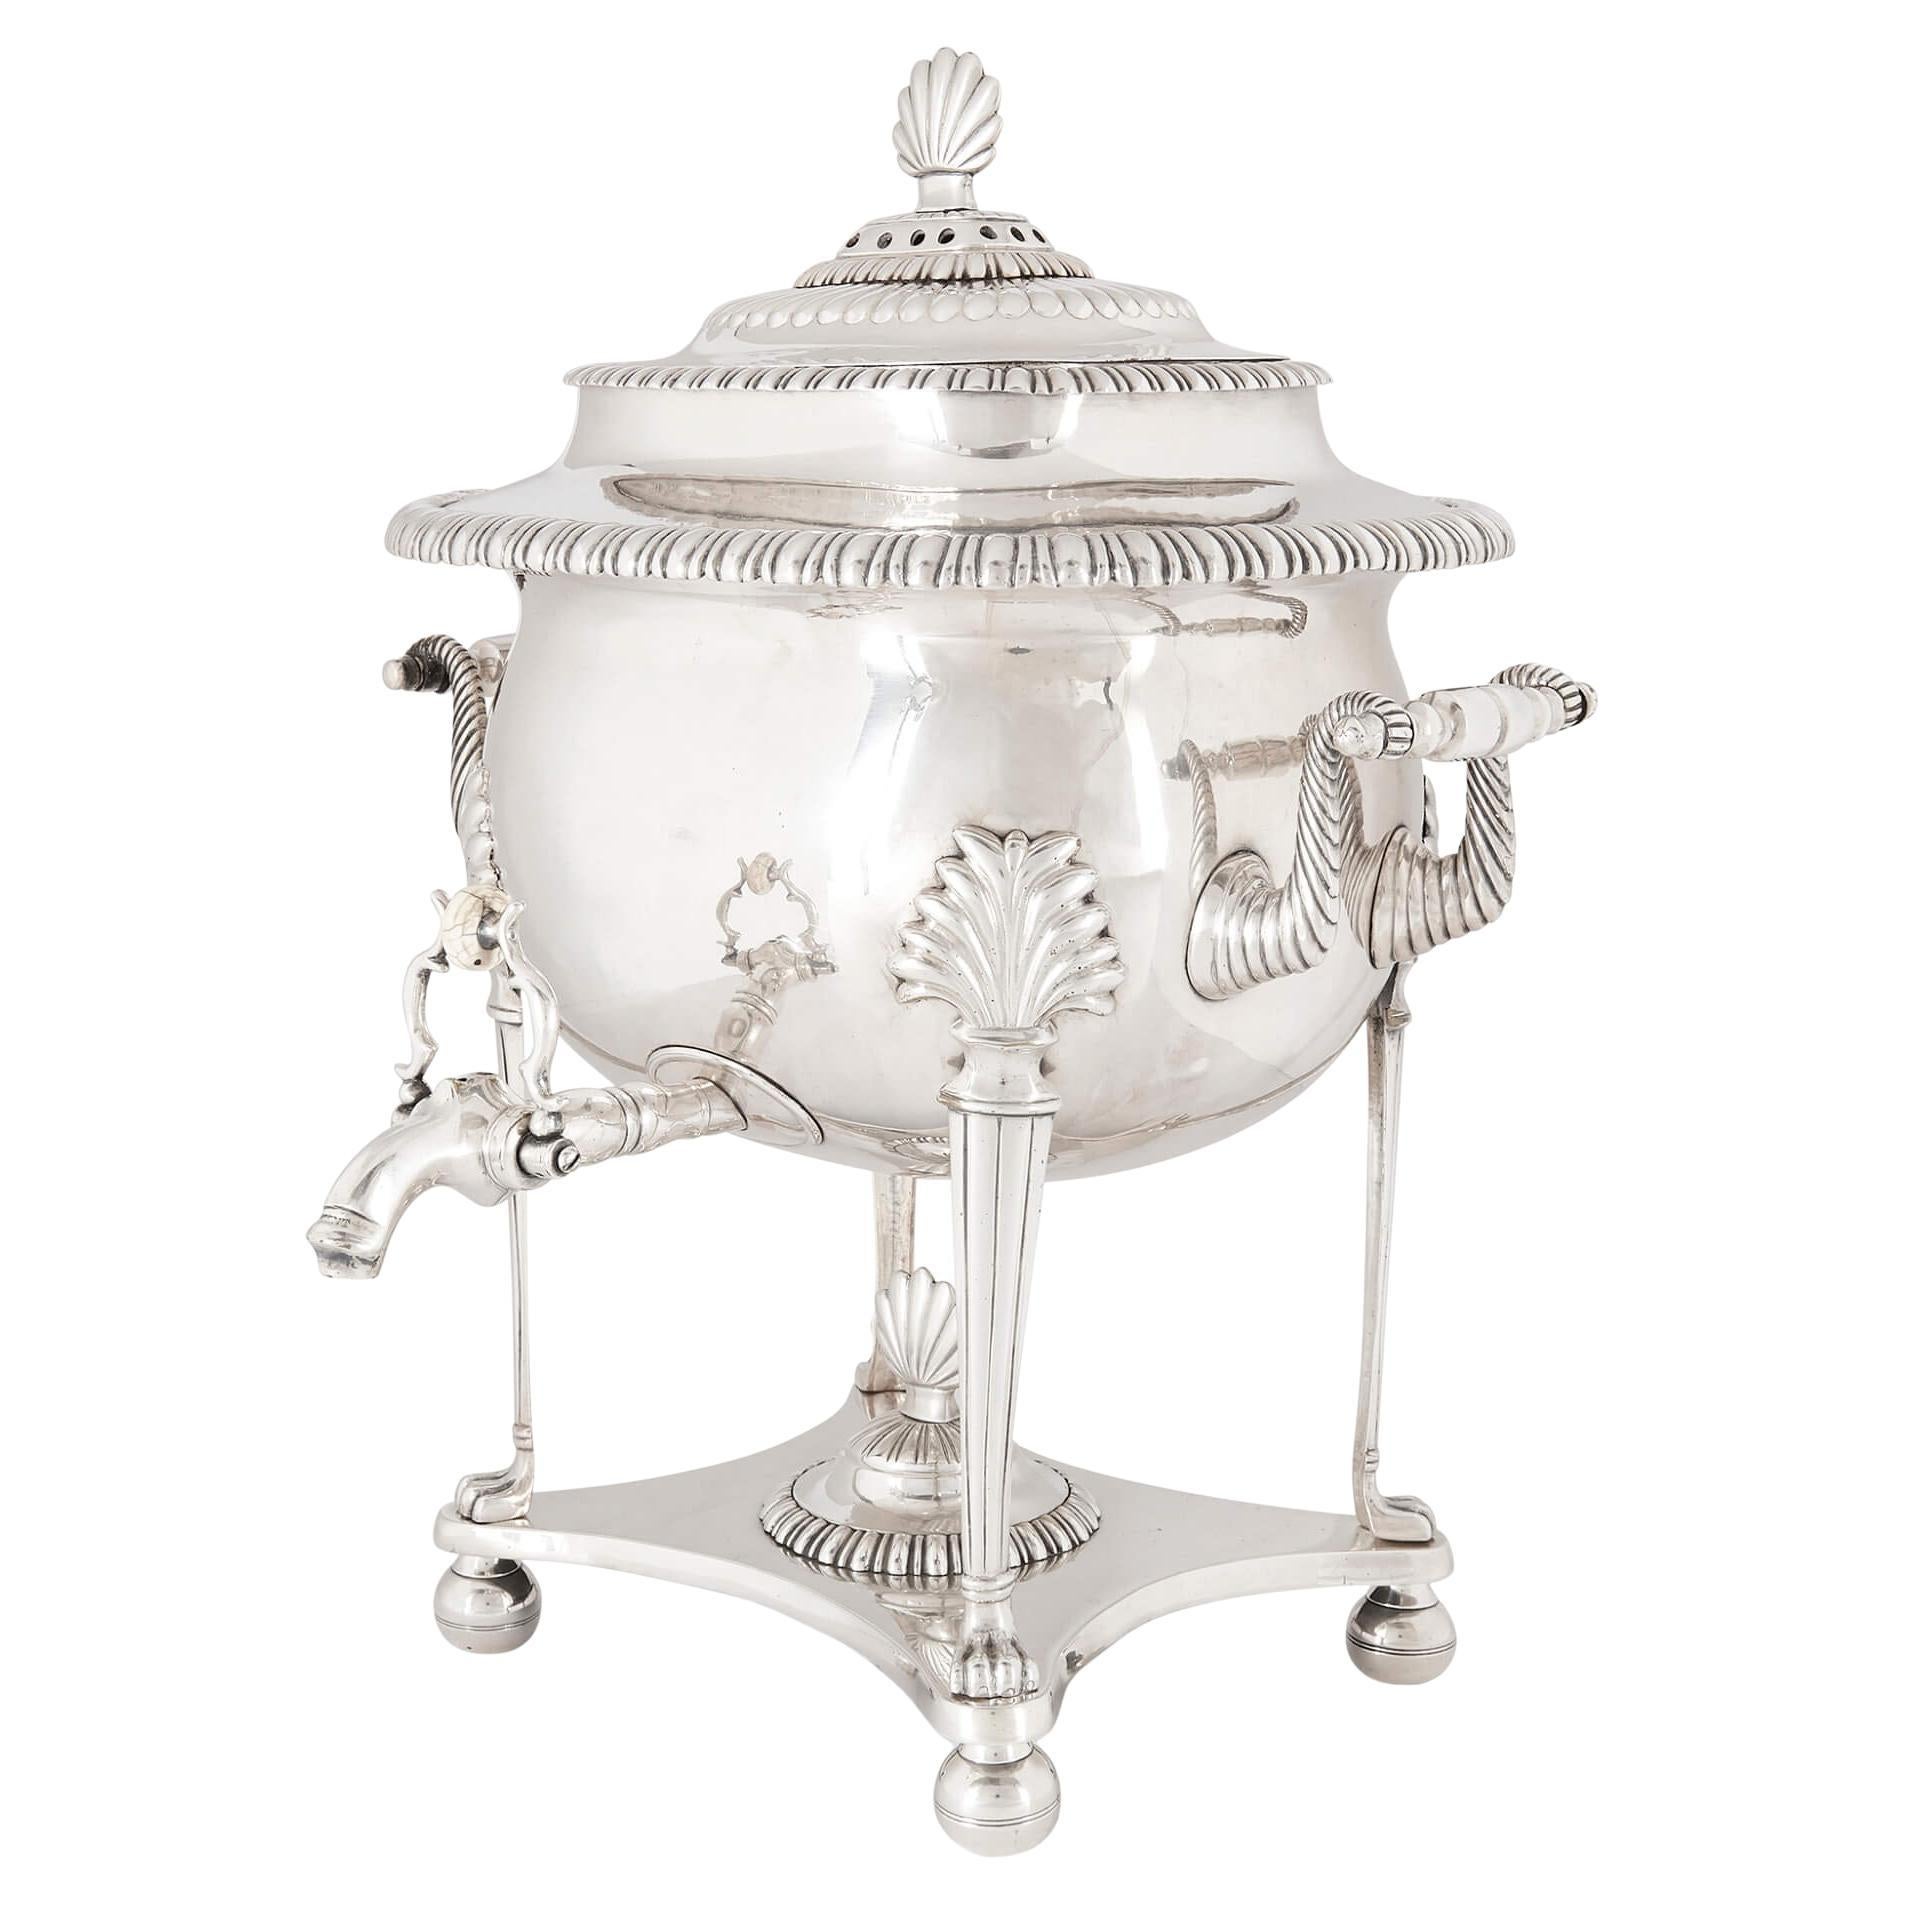 Twin-Handled Antique English Silver Plated Samovar, London, Late 19th Century For Sale